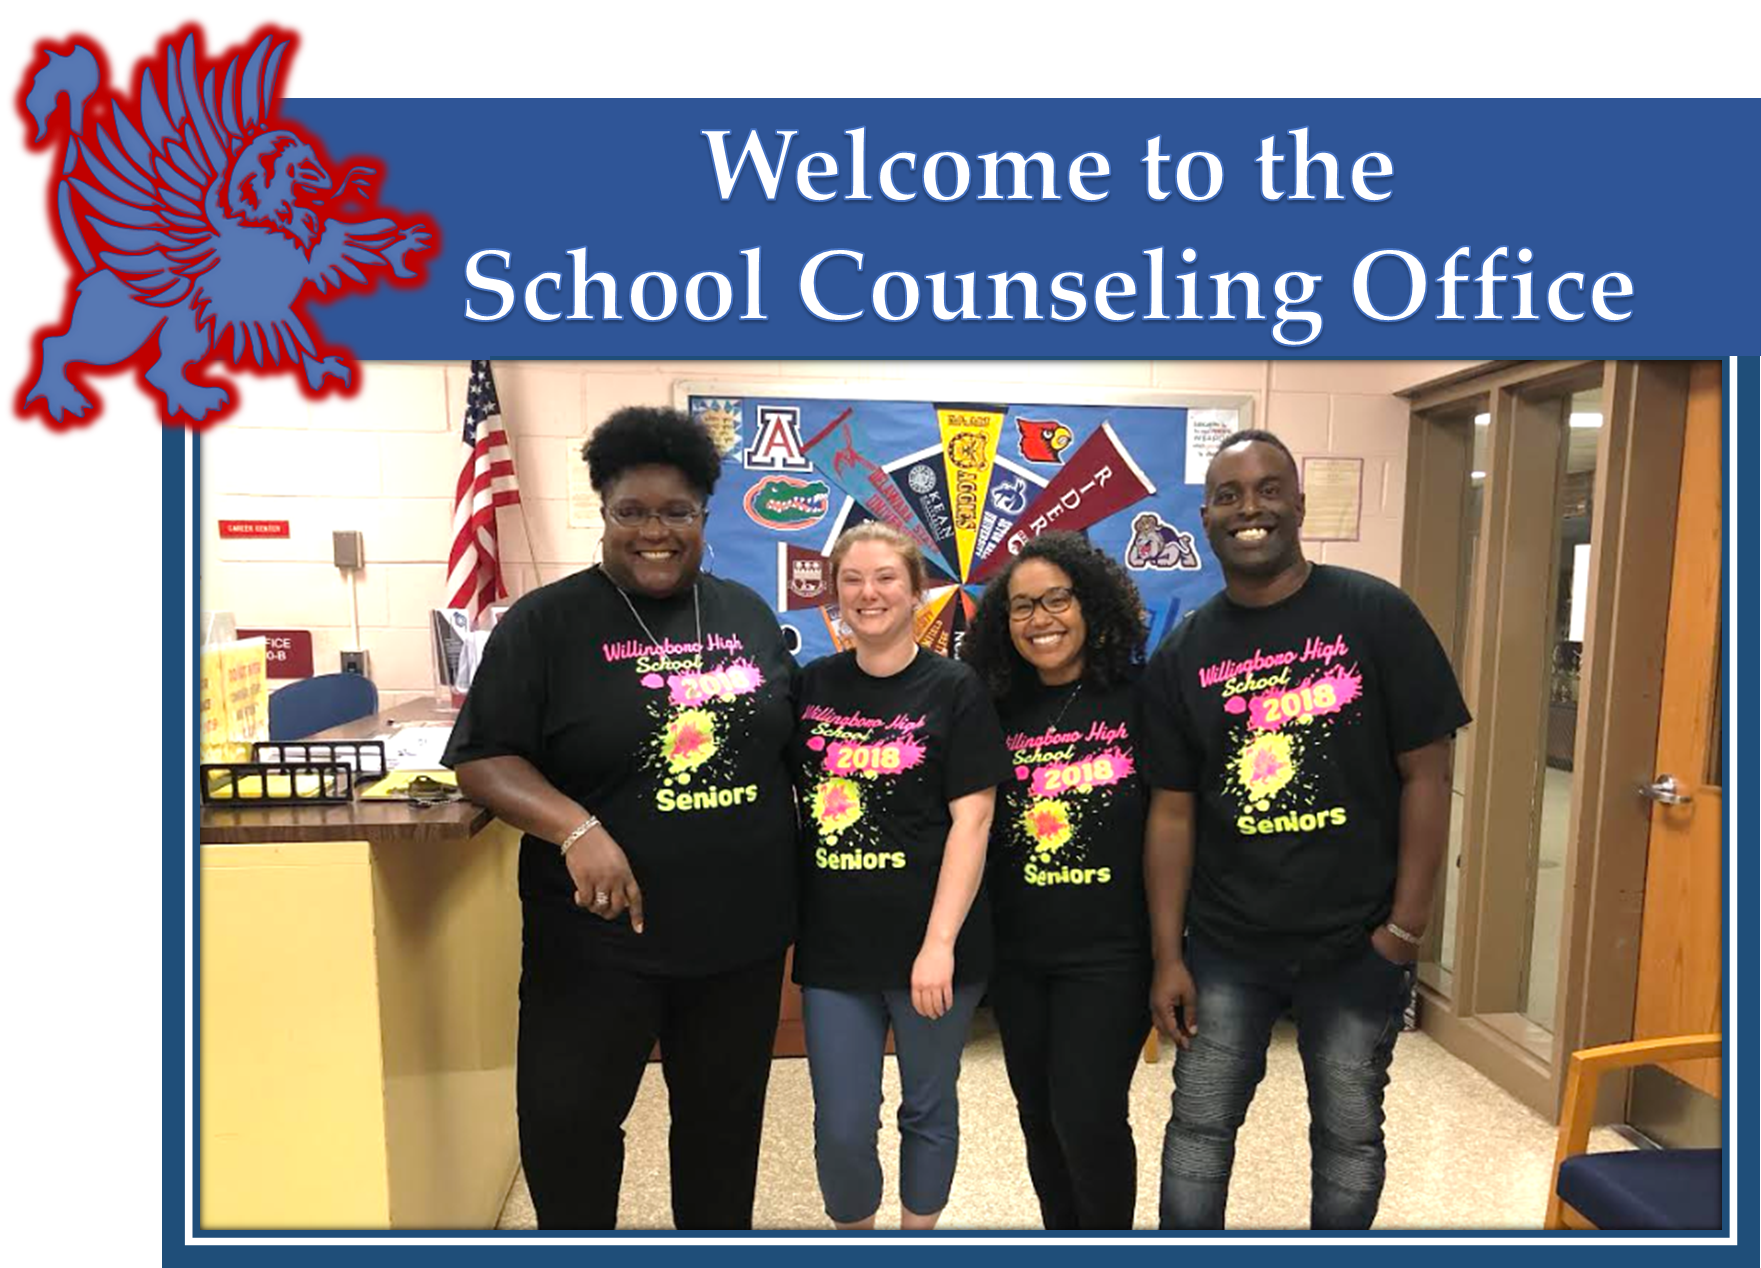 WELCOME TO THE SCHOOL COUNSELING OFFICE - PHOTO OF THE STAFF